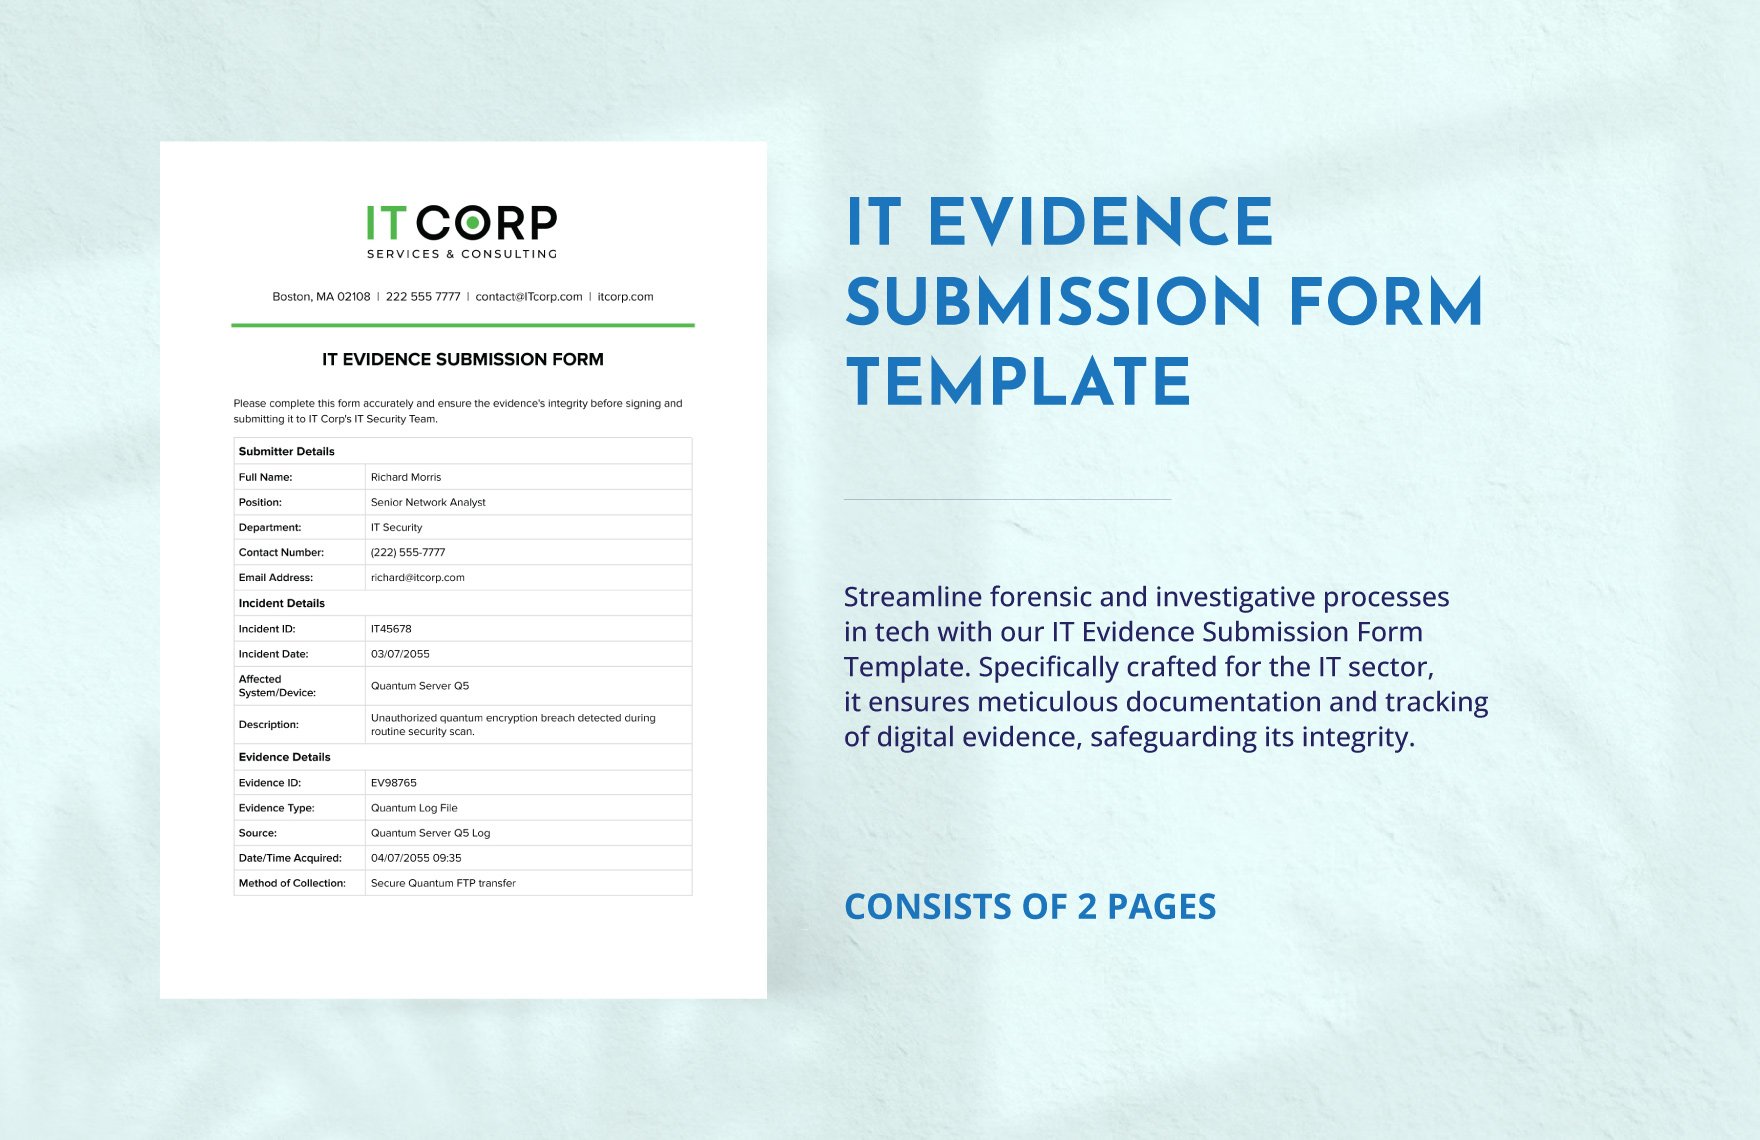 IT Evidence Submission Form Template